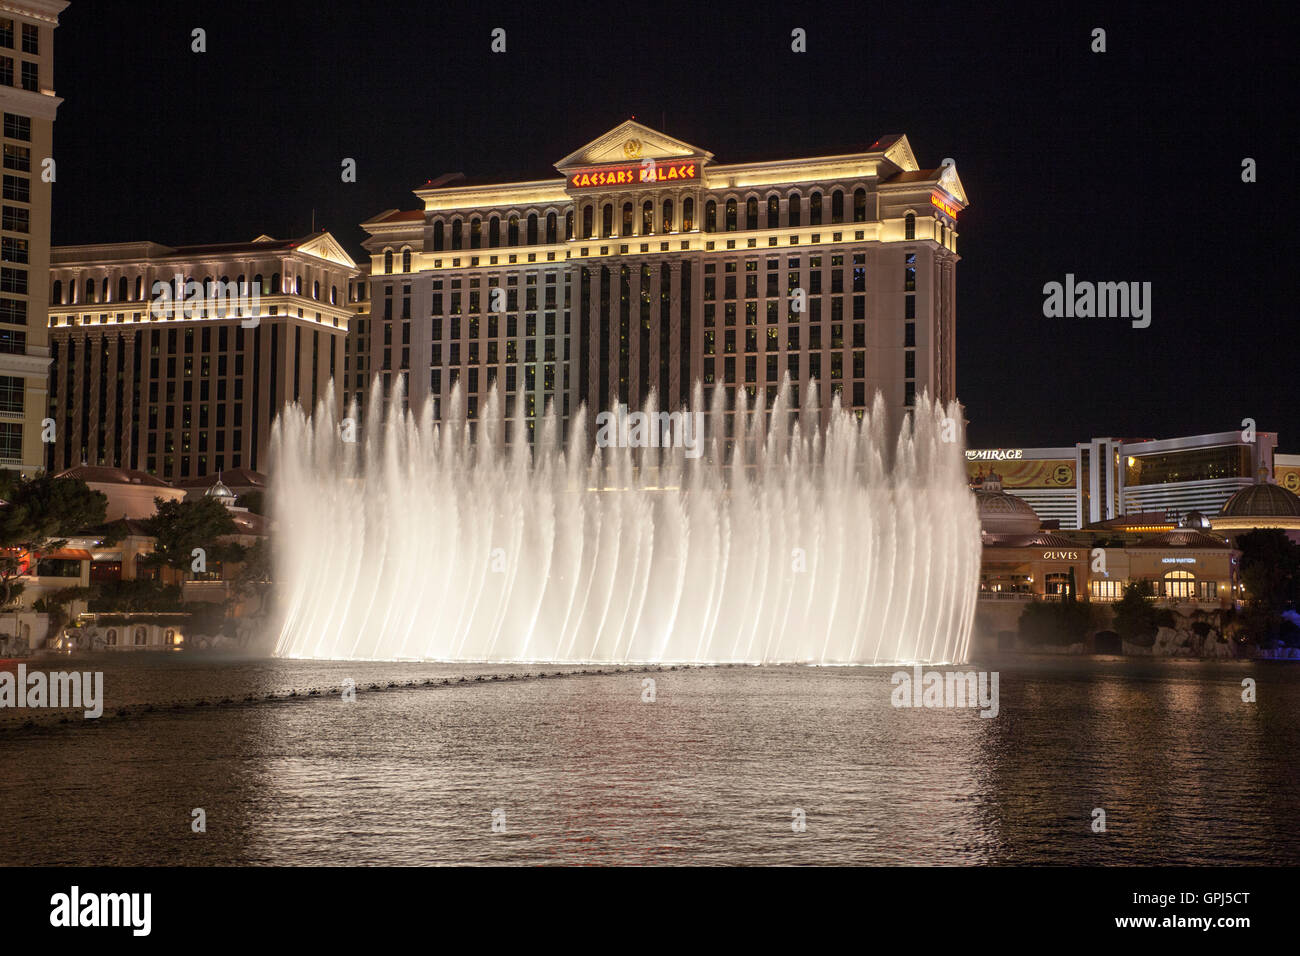 Caesars Palace in Las Vegas Nevada with the fountains of the The Bellagio hotel in the foreground at night Stock Photo